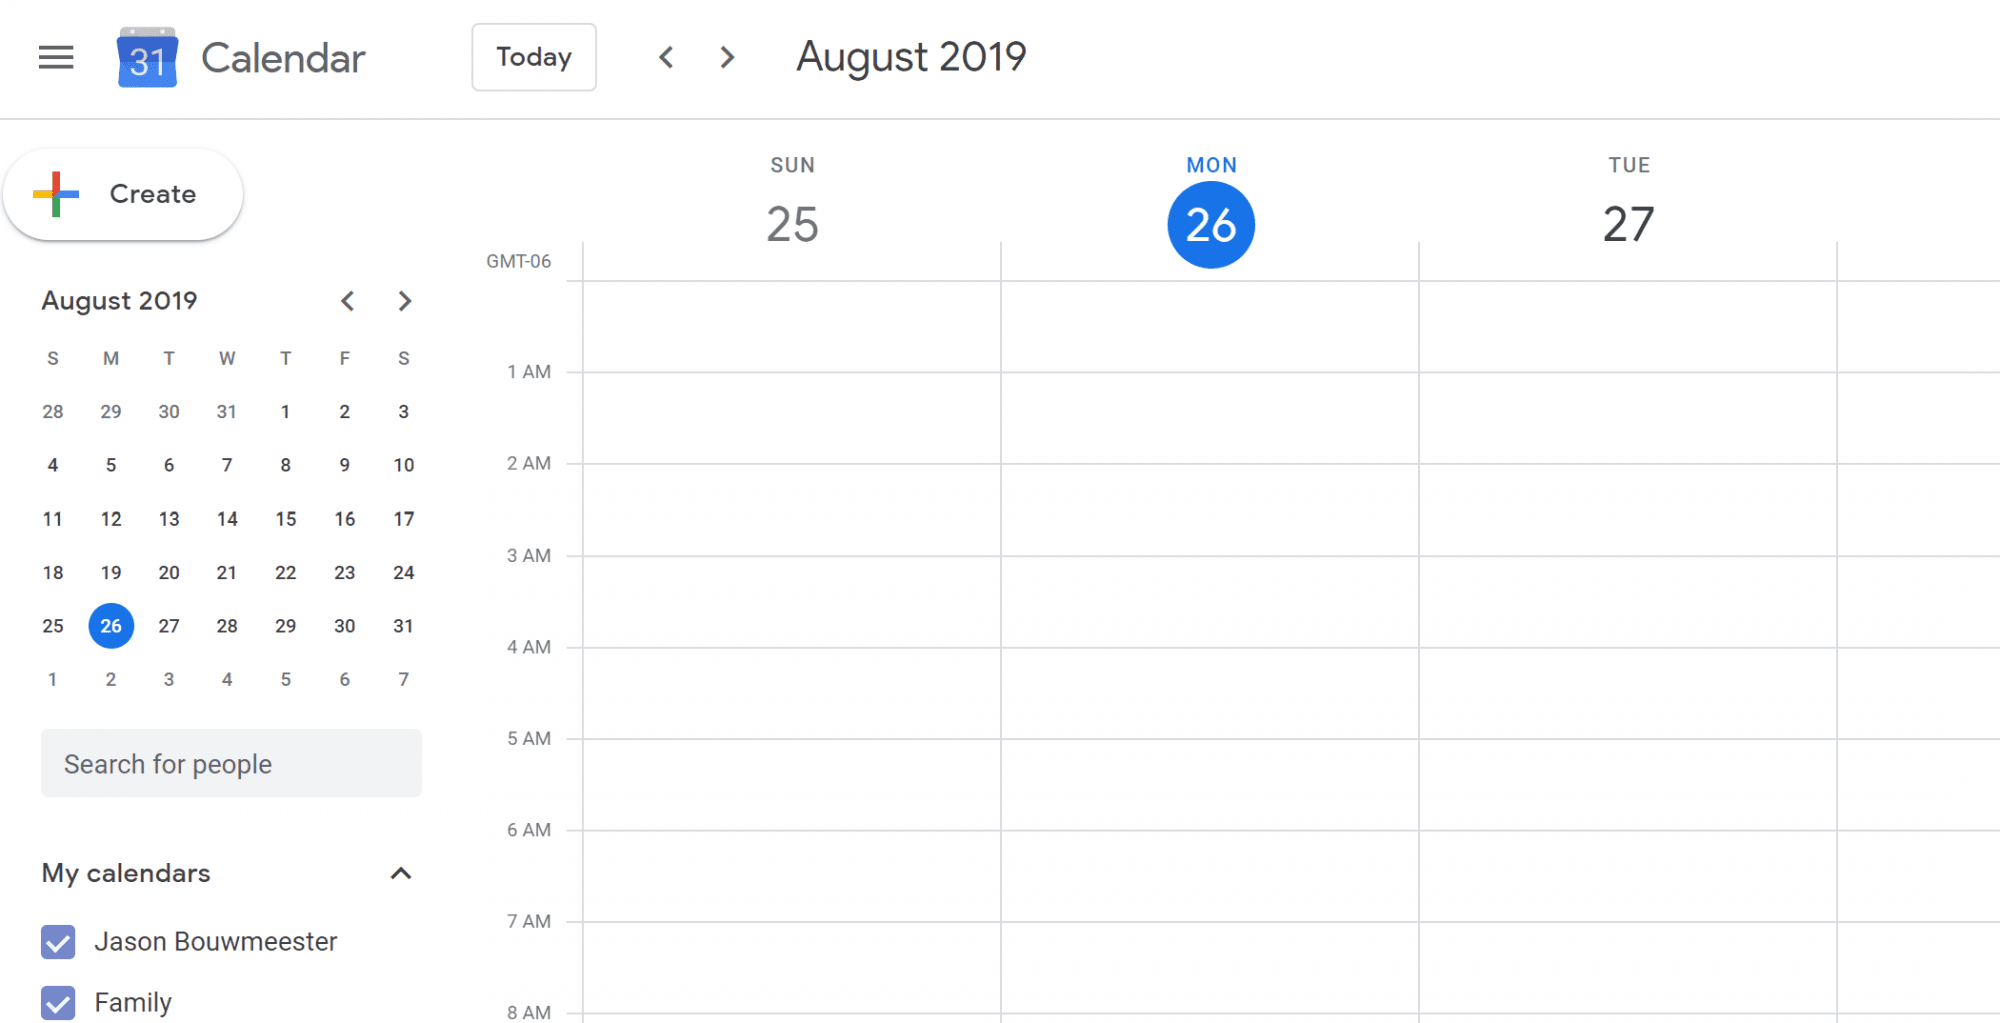 After changing the settings, the spam events in my calendar disappeared